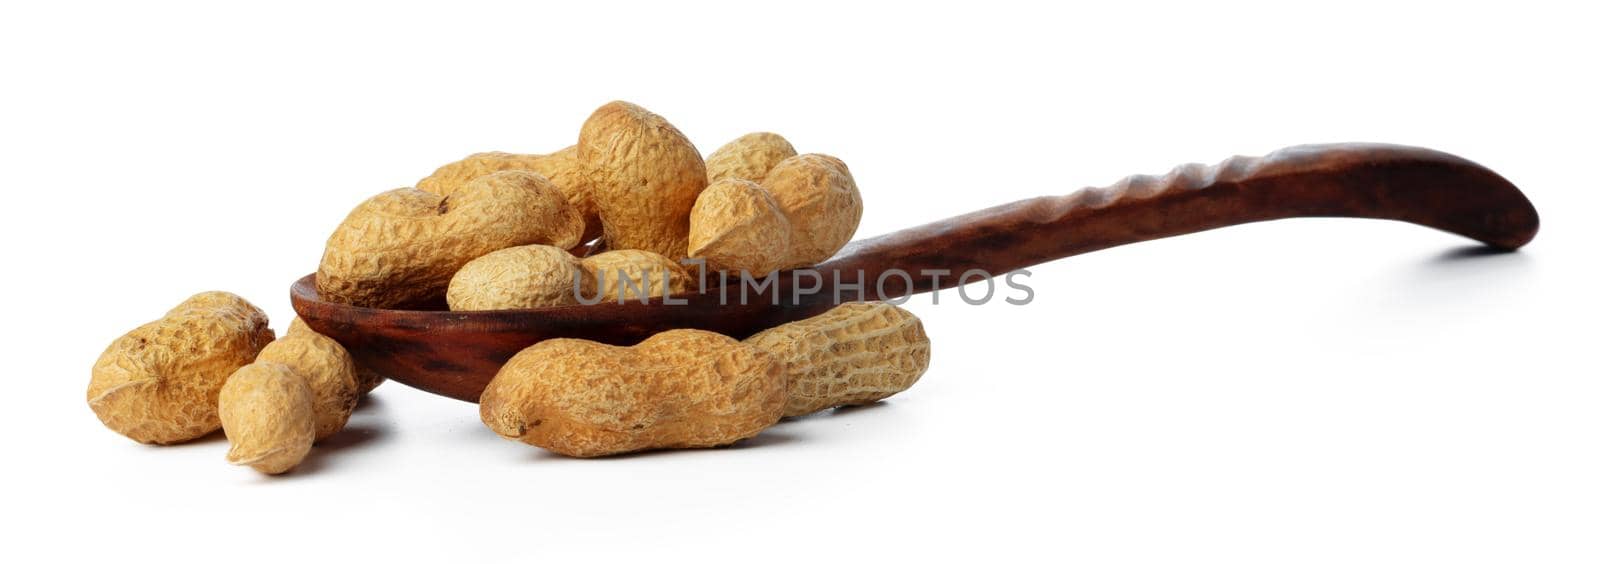 Spoon of peanuts in shell isolated on white by Fabrikasimf